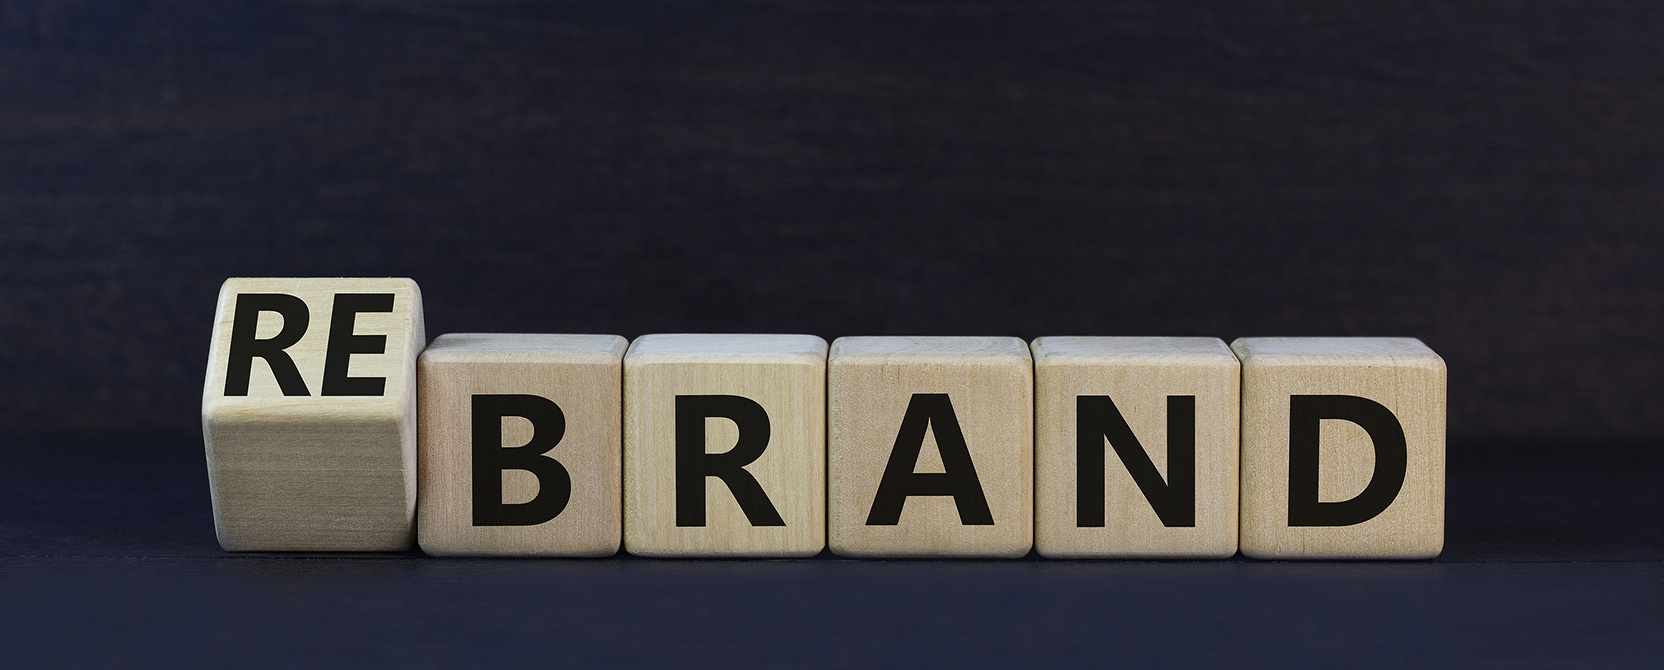 When done correctly, a multifamily rebrand or repositioning can help you increase occupancy rates, attract more apartment leads, and ultimately generate higher revenue.